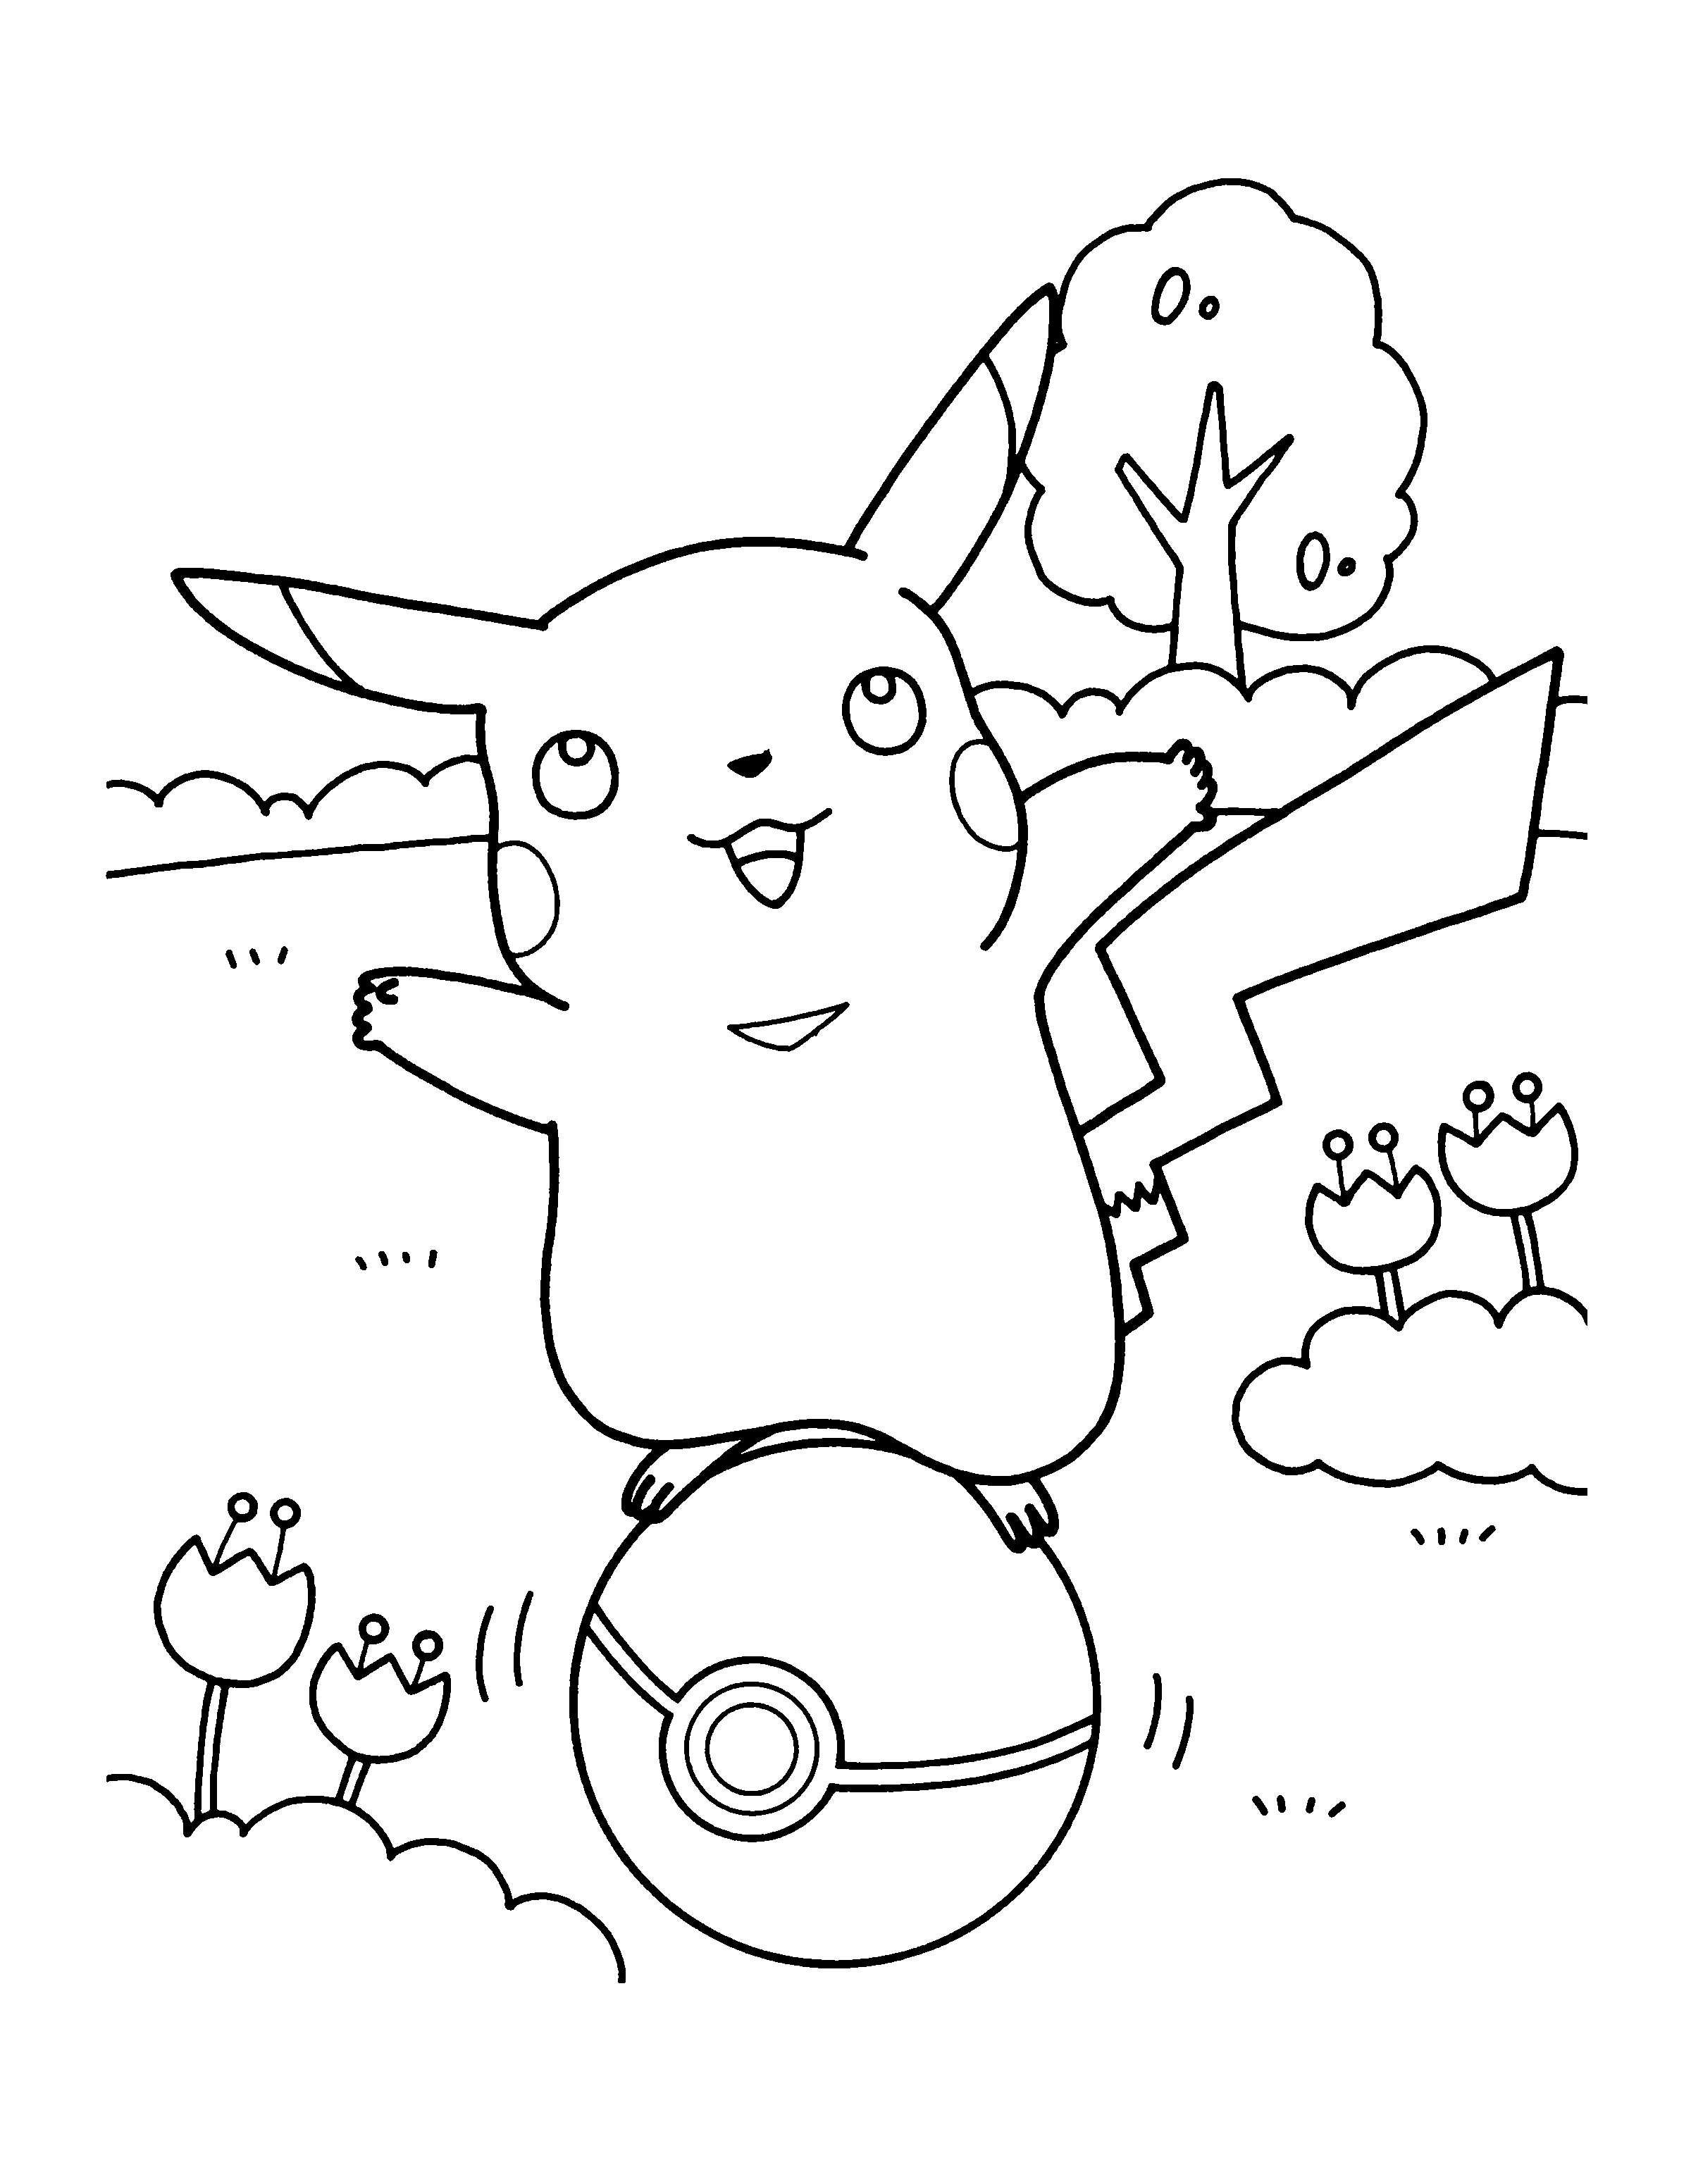 Pokemon Coloring Page Tv Series Coloring Page | PicGifs.com